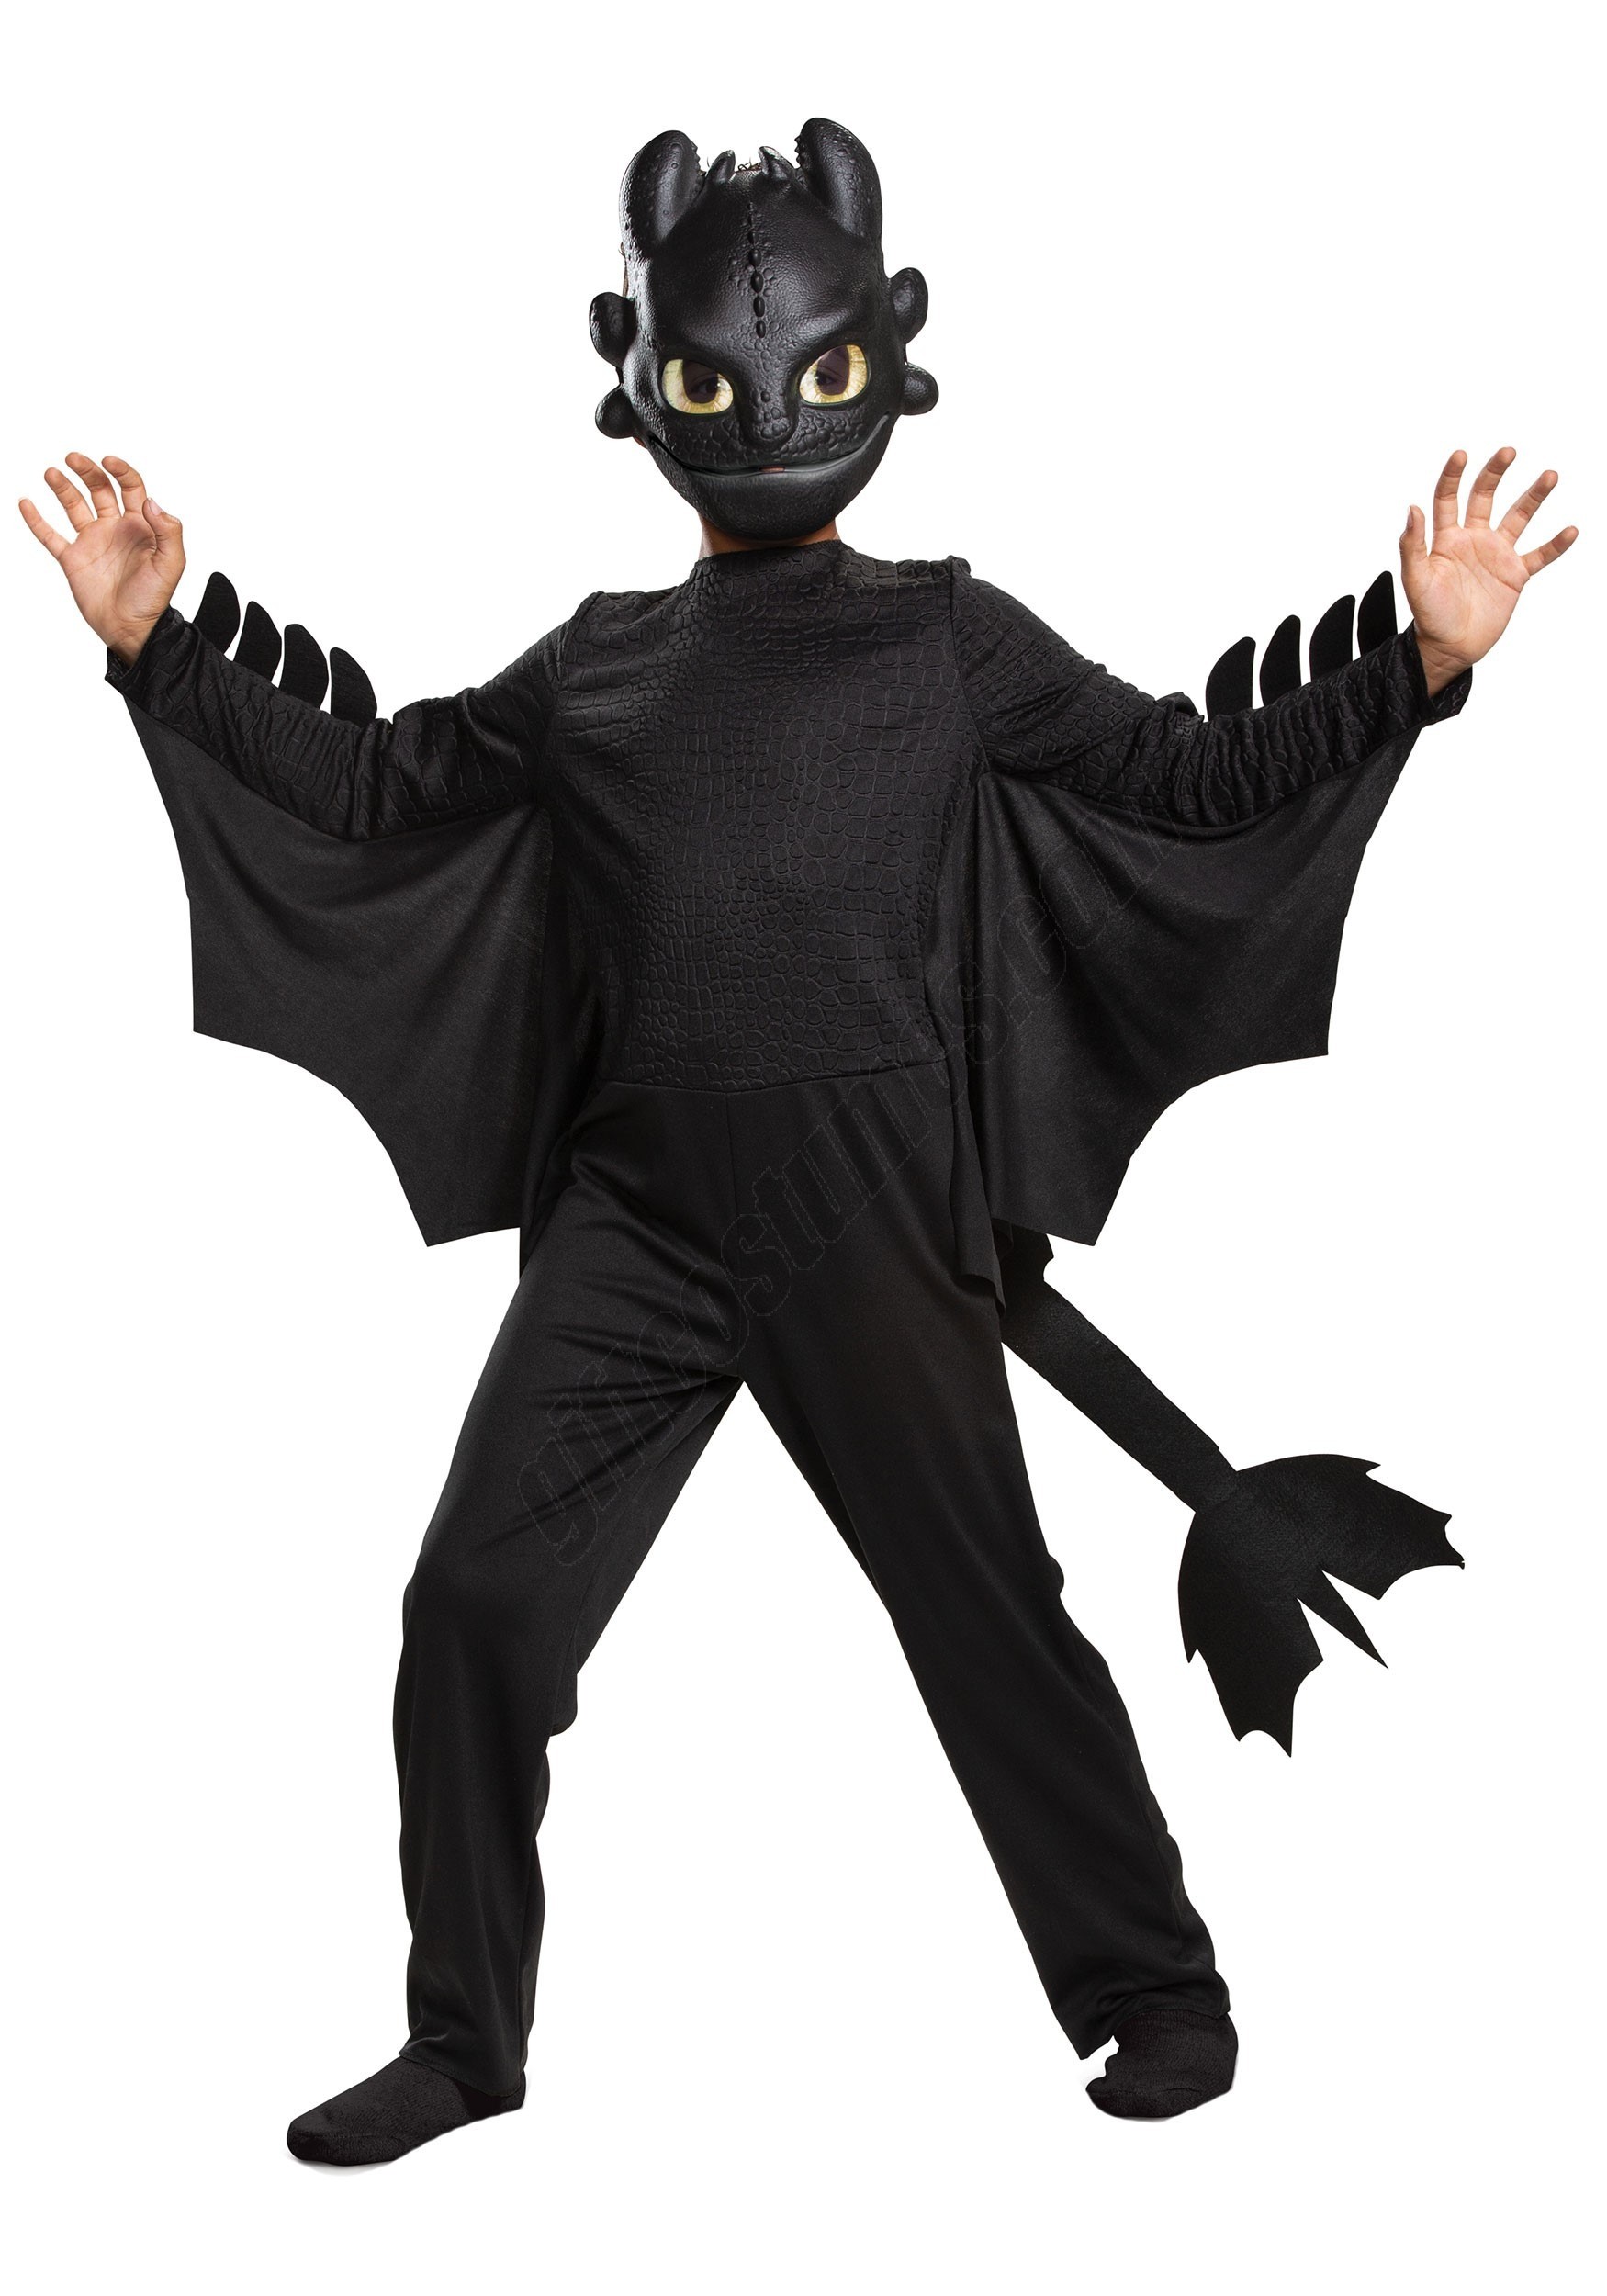 How to Train Your Dragon Kid's Toothless Classic Costume Promotions - How to Train Your Dragon Kid's Toothless Classic Costume Promotions